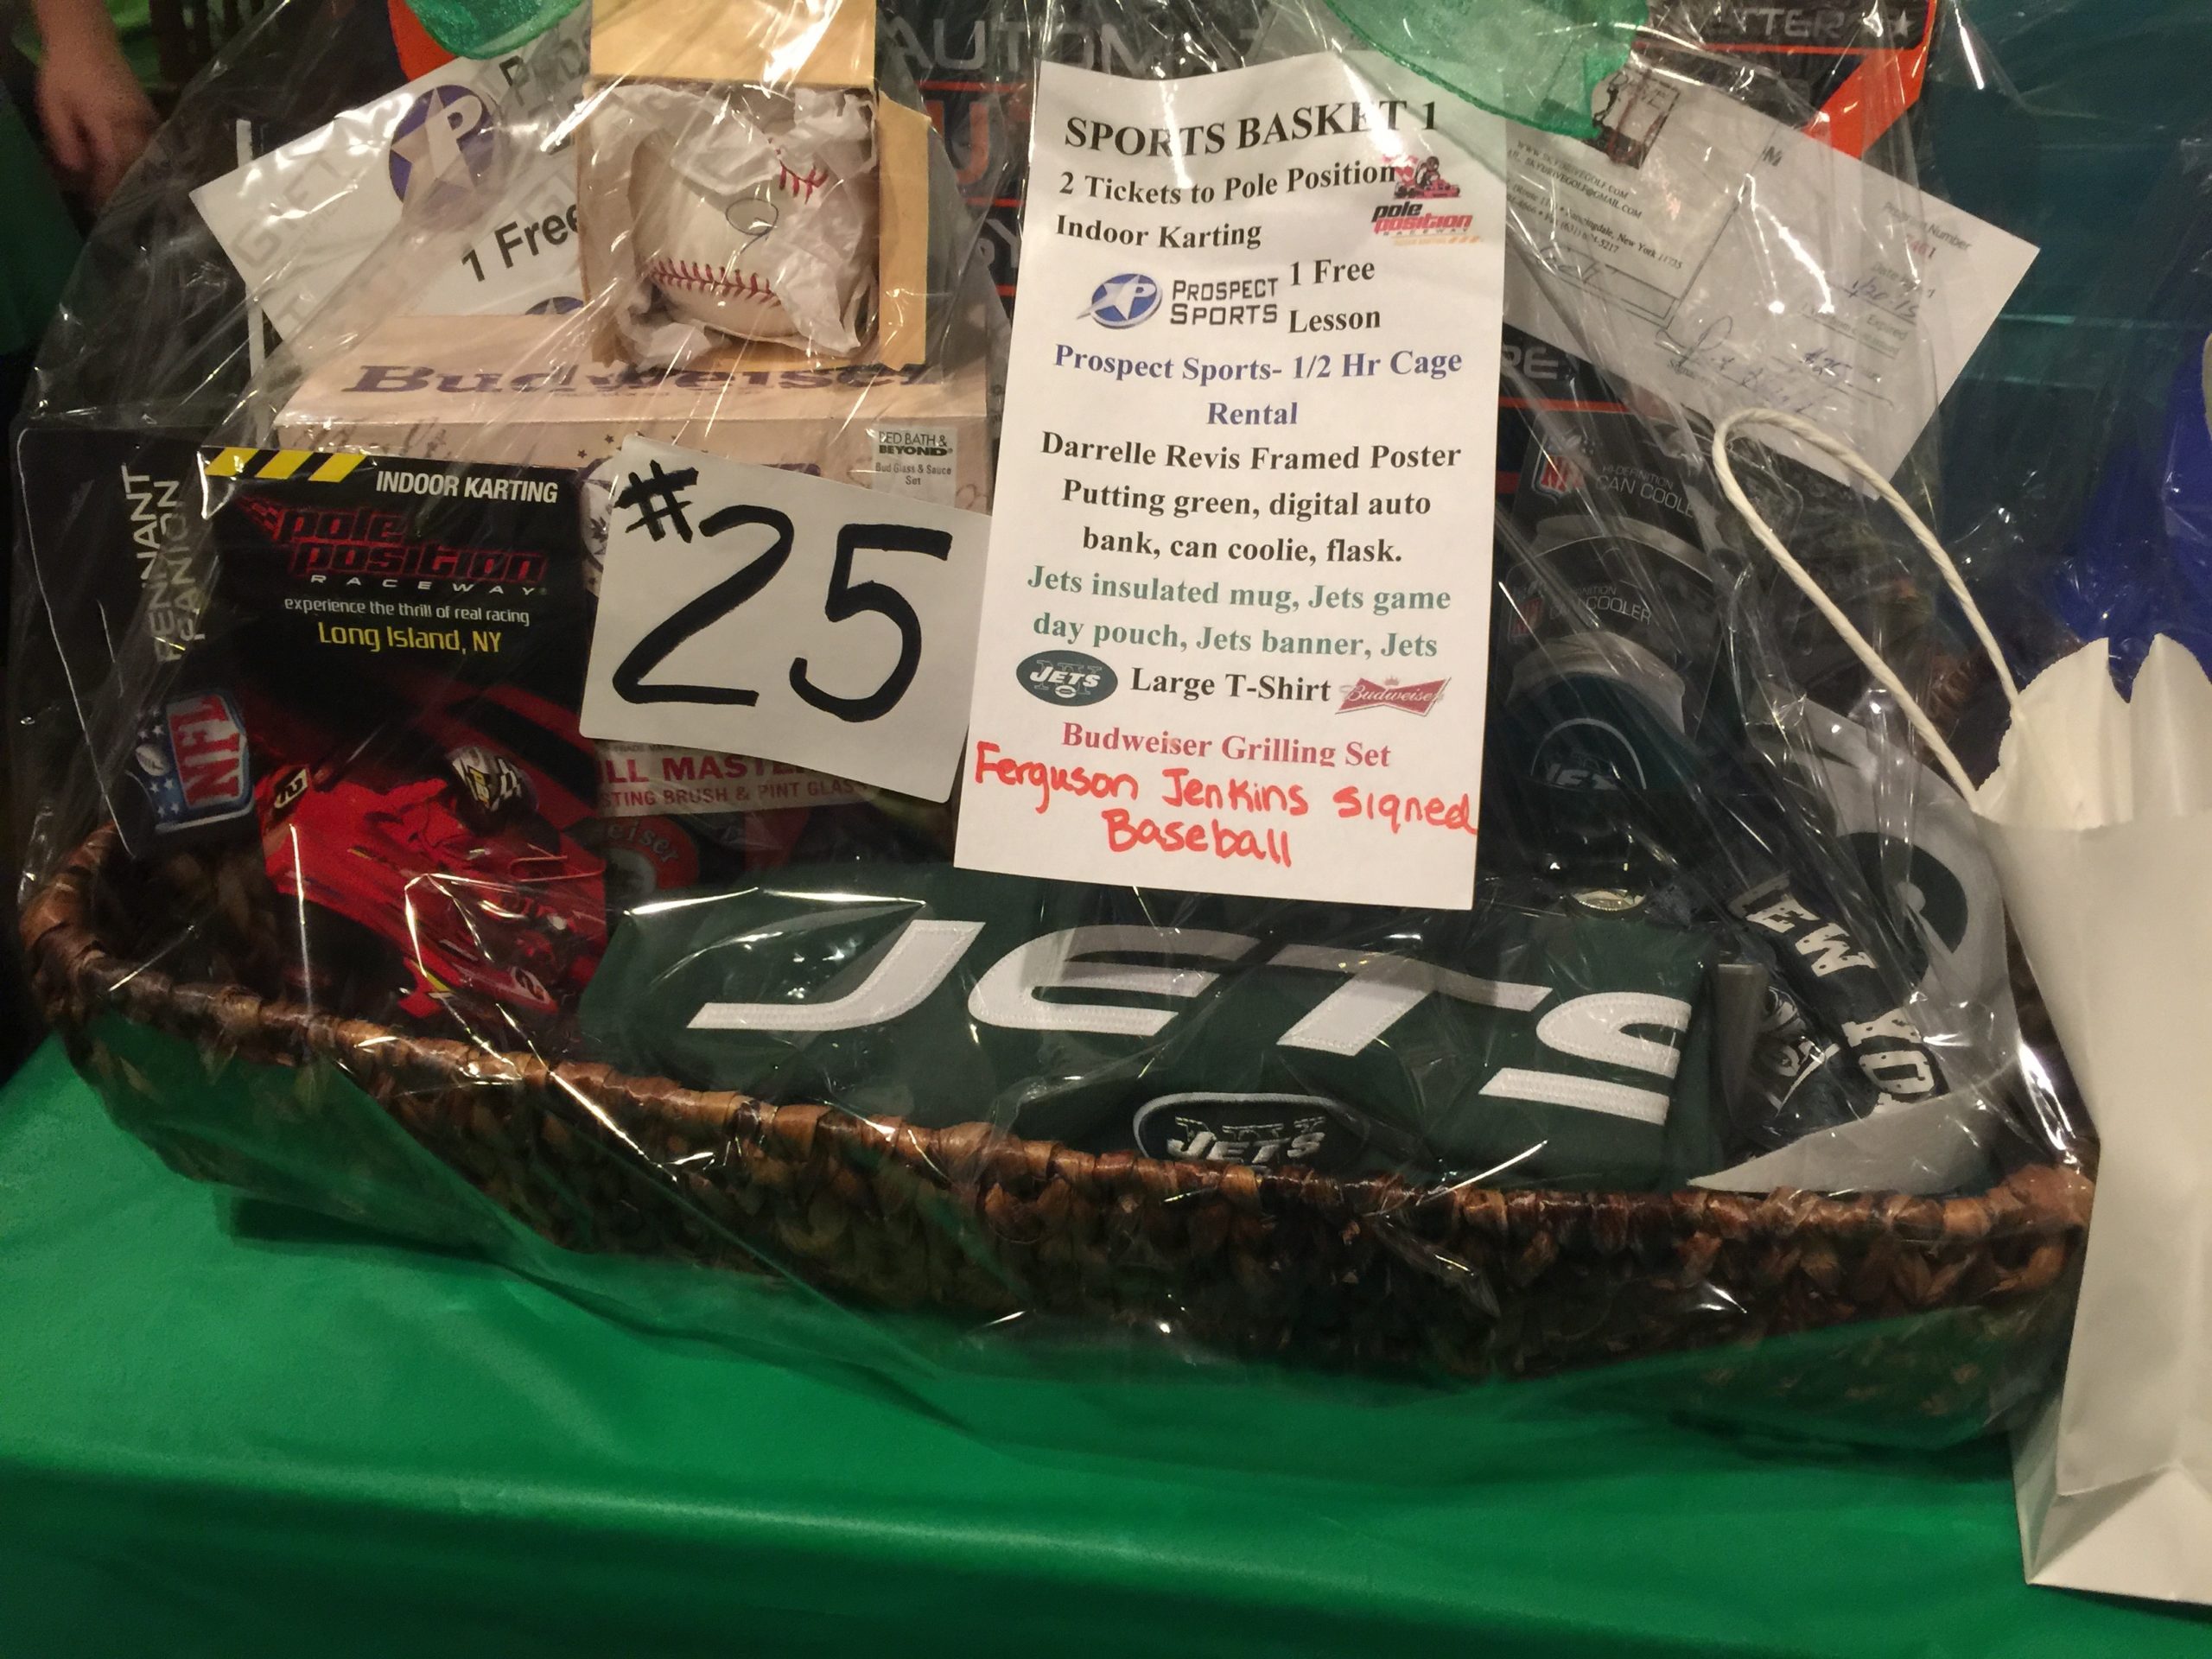 Check out all these raffle baskets! That’s one way to raise some cash!